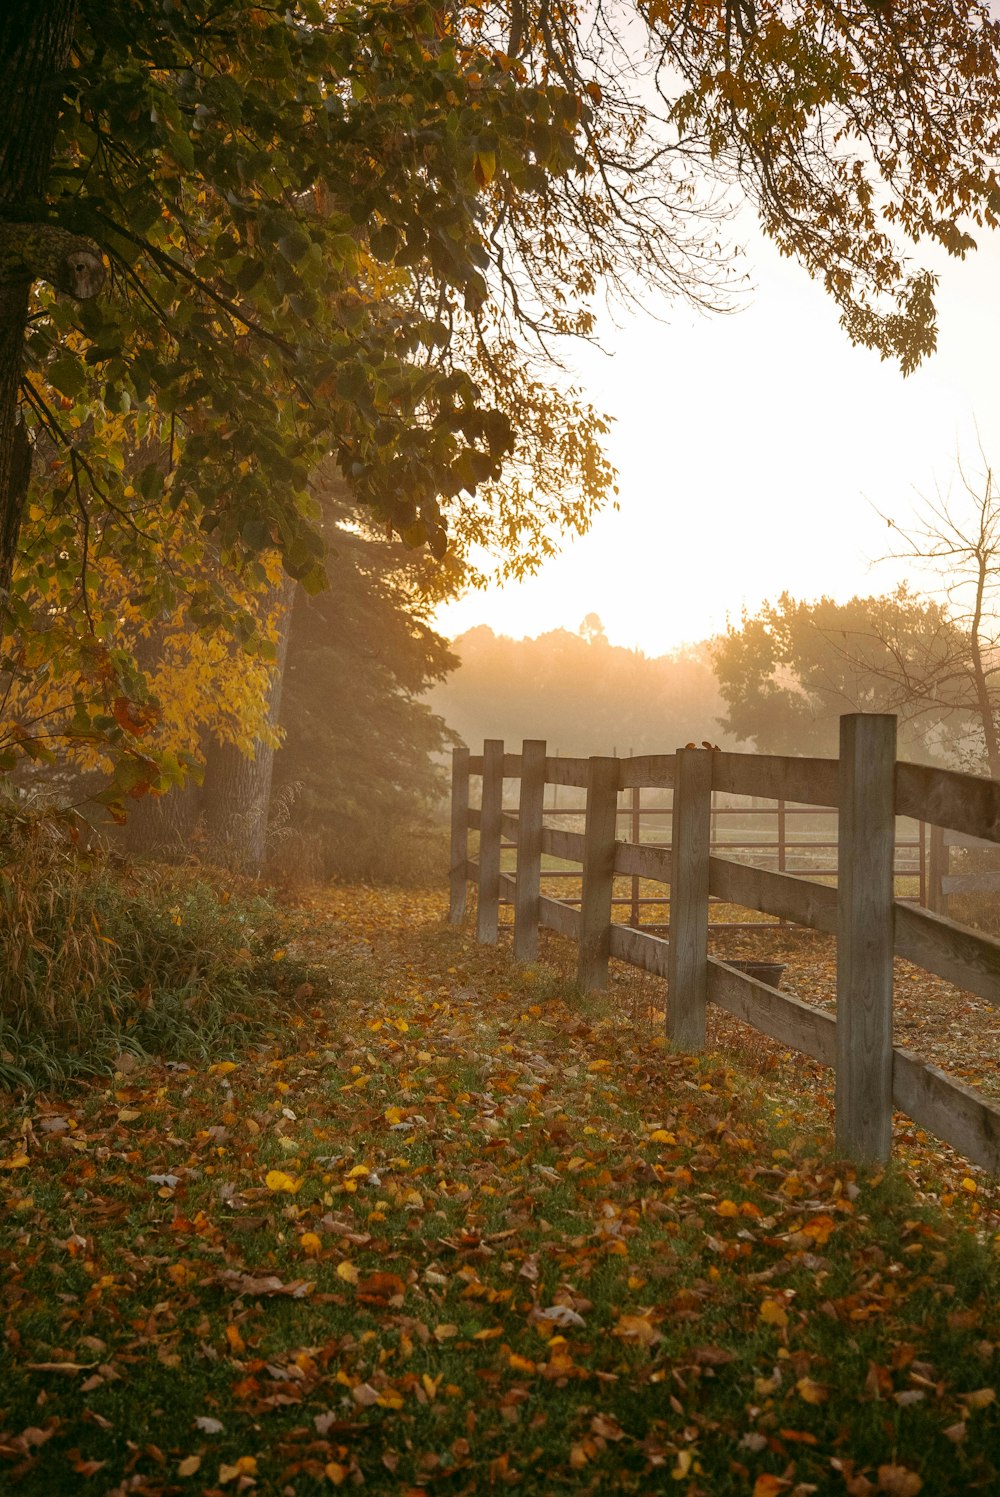 a wooden fence in a field with leaves on the ground